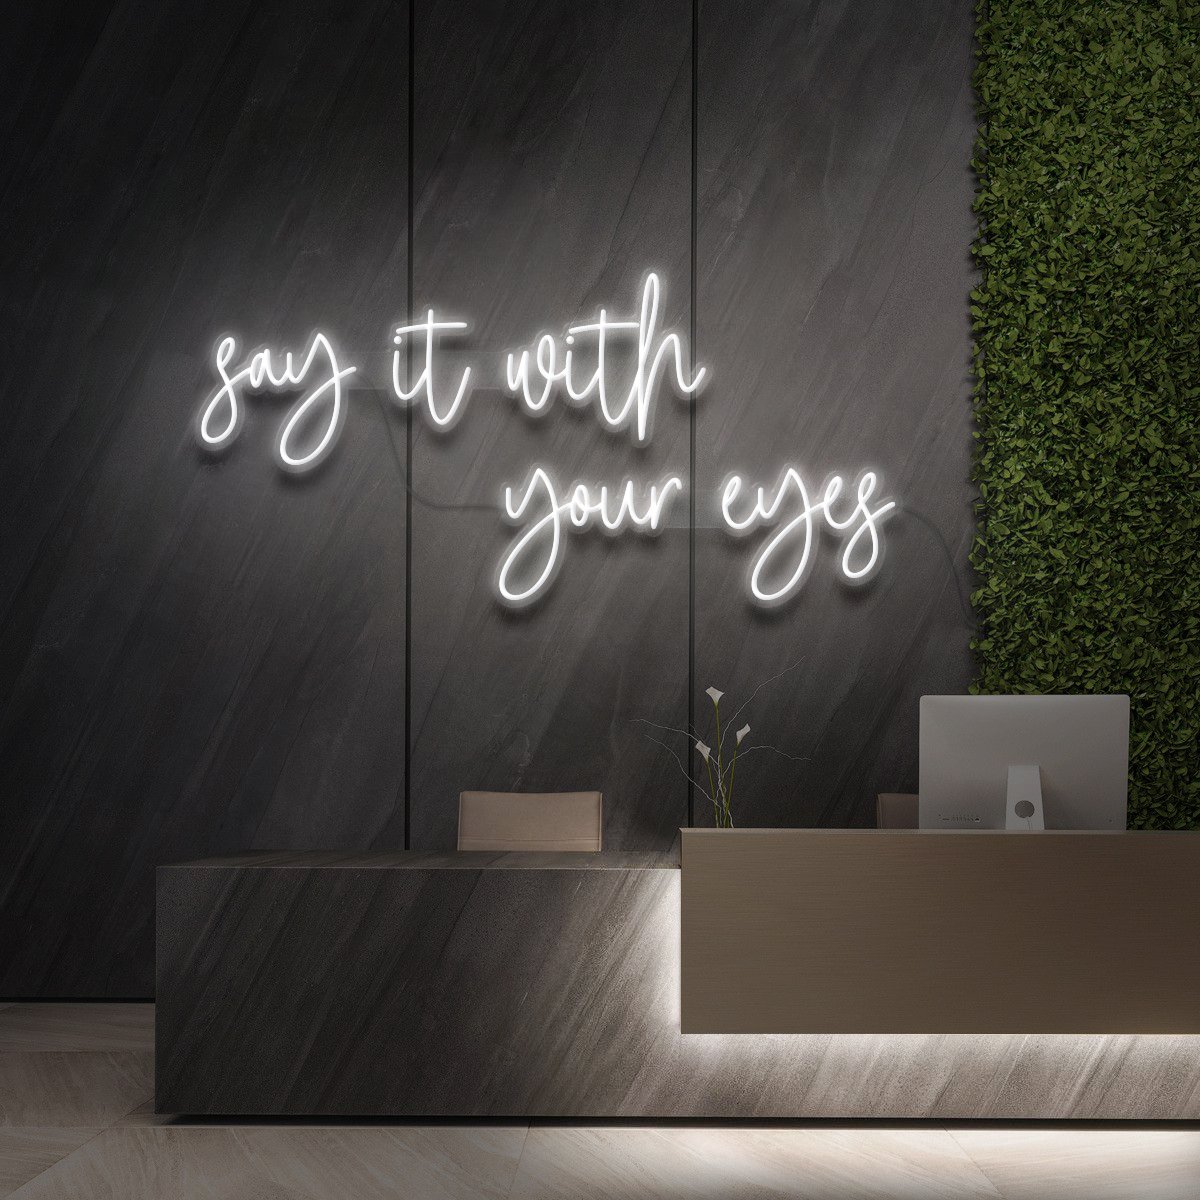 "Say It With Your Eyes" Neon Sign for Beauty & Cosmetic Studios